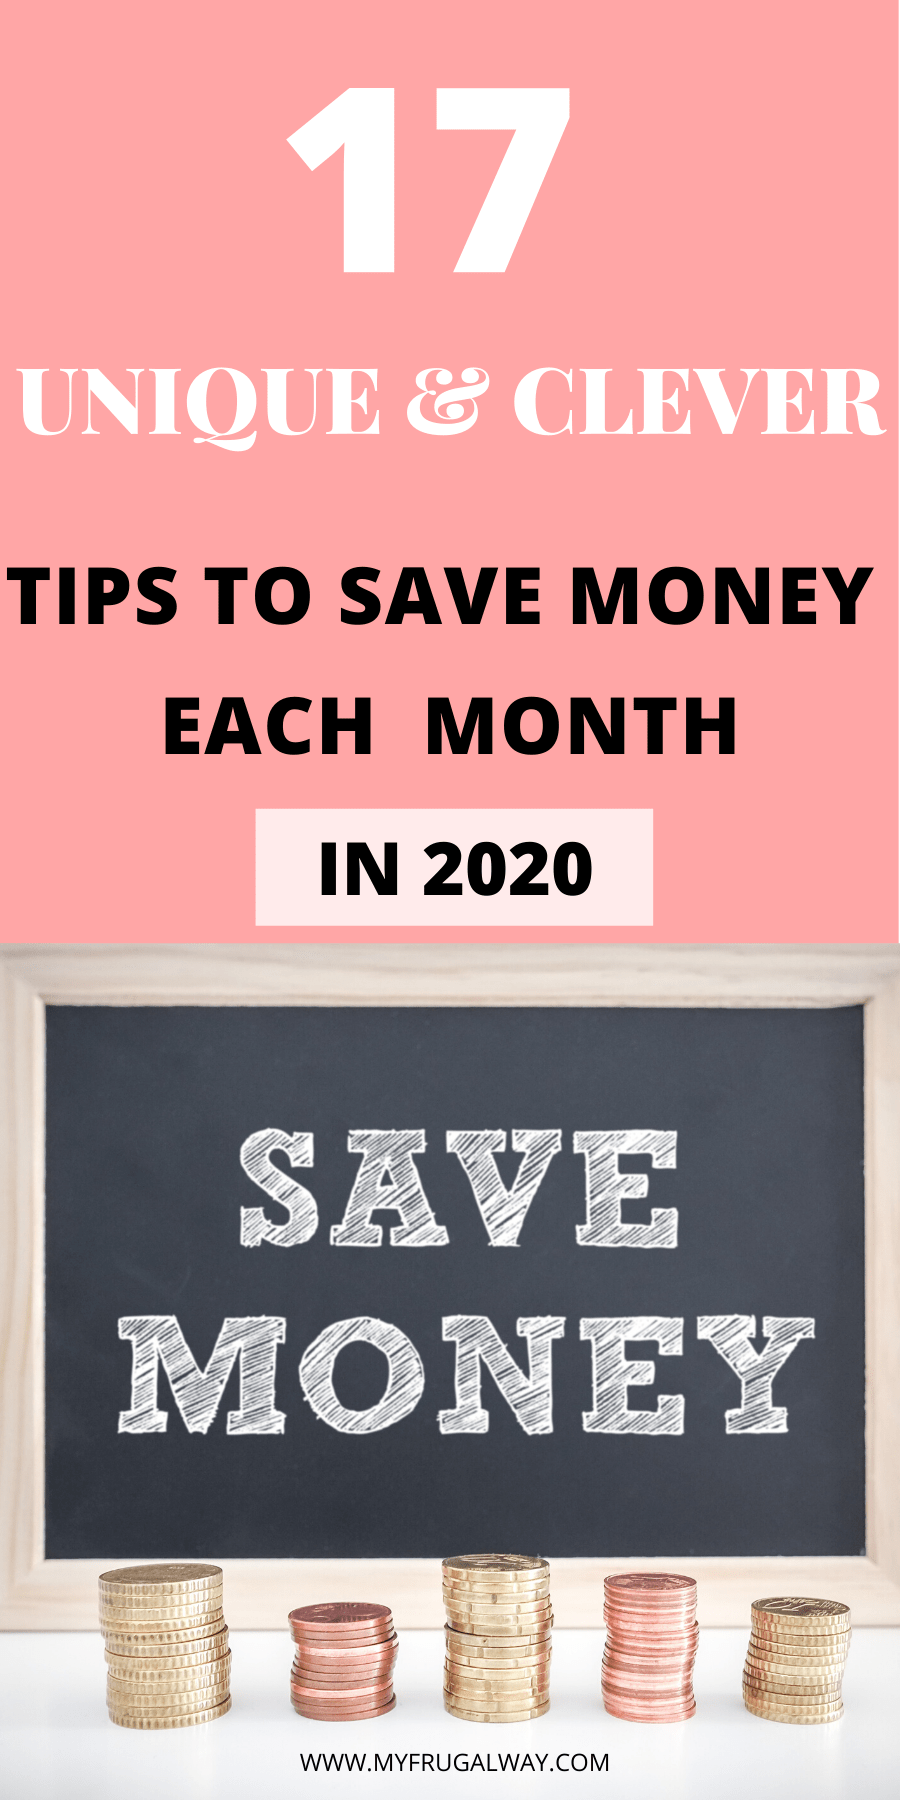 Looking for budgeting tips in 2020 to get hold of your finances. These 17 unique and clever frugal living tips will help you save money each month so you can live a debt-free life. Take control of your finances. #savemoney #finances #money 